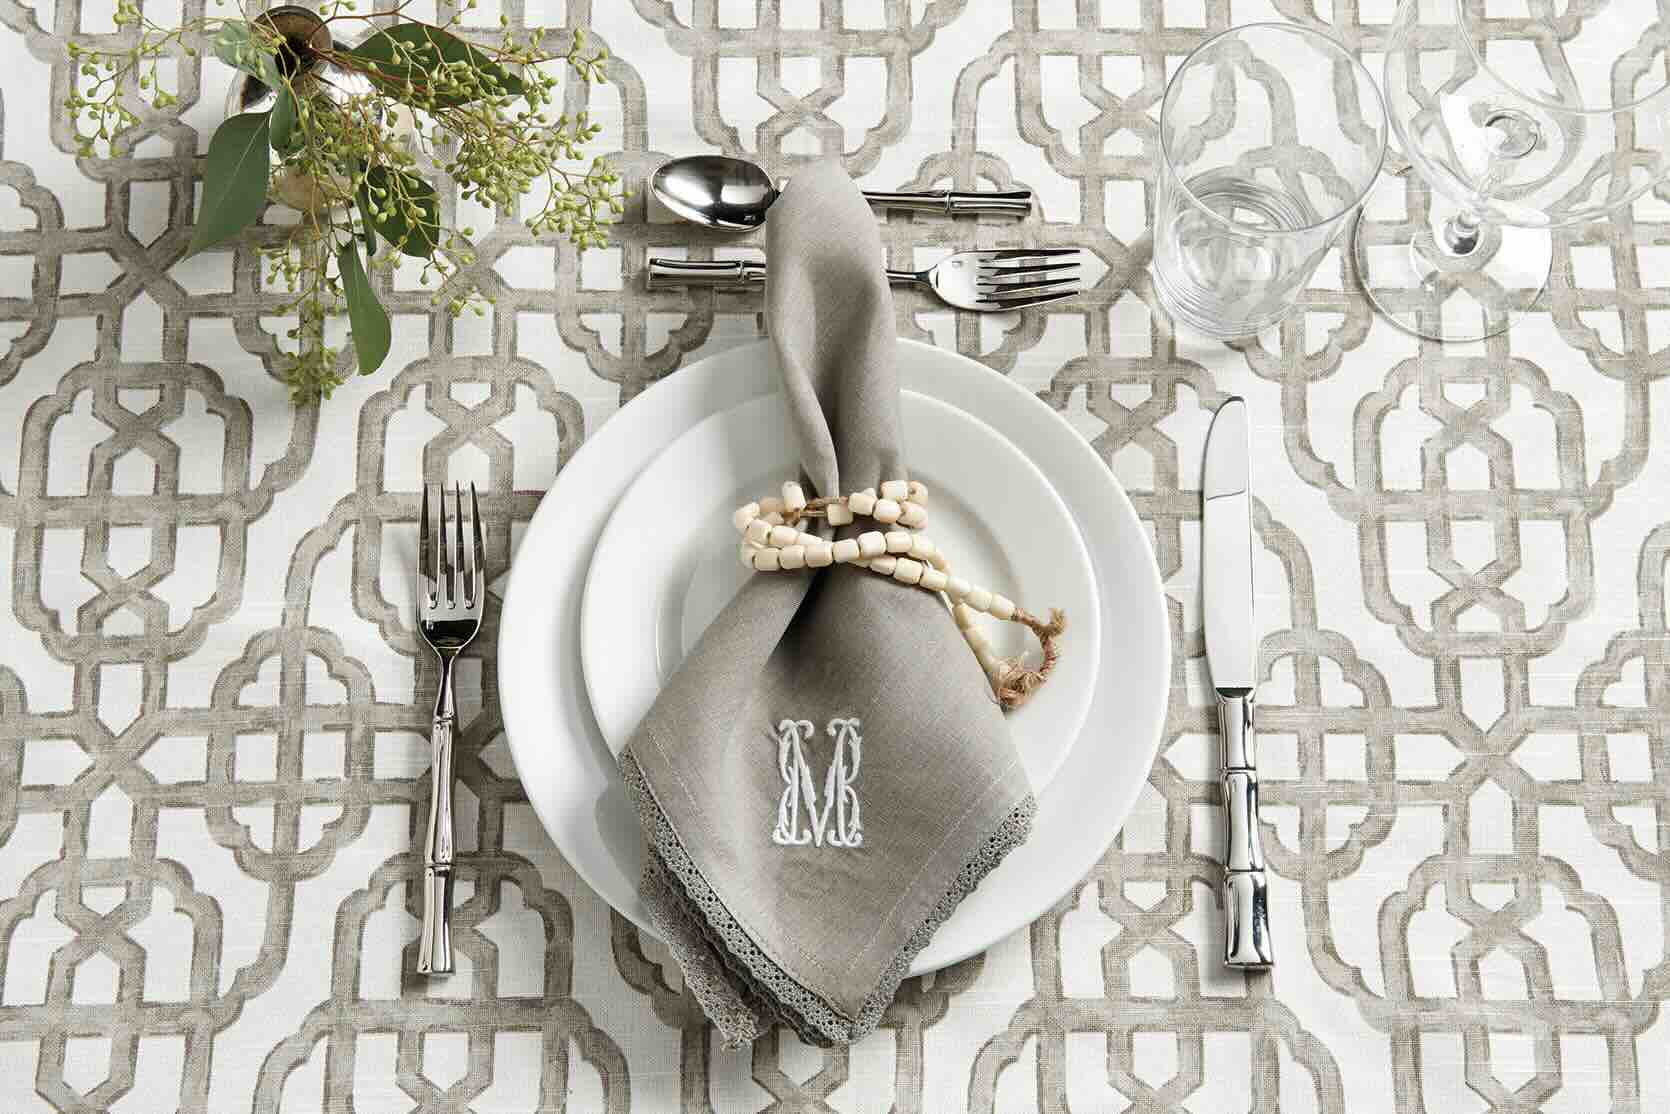 How Can I Use Silver In My Table Settings?